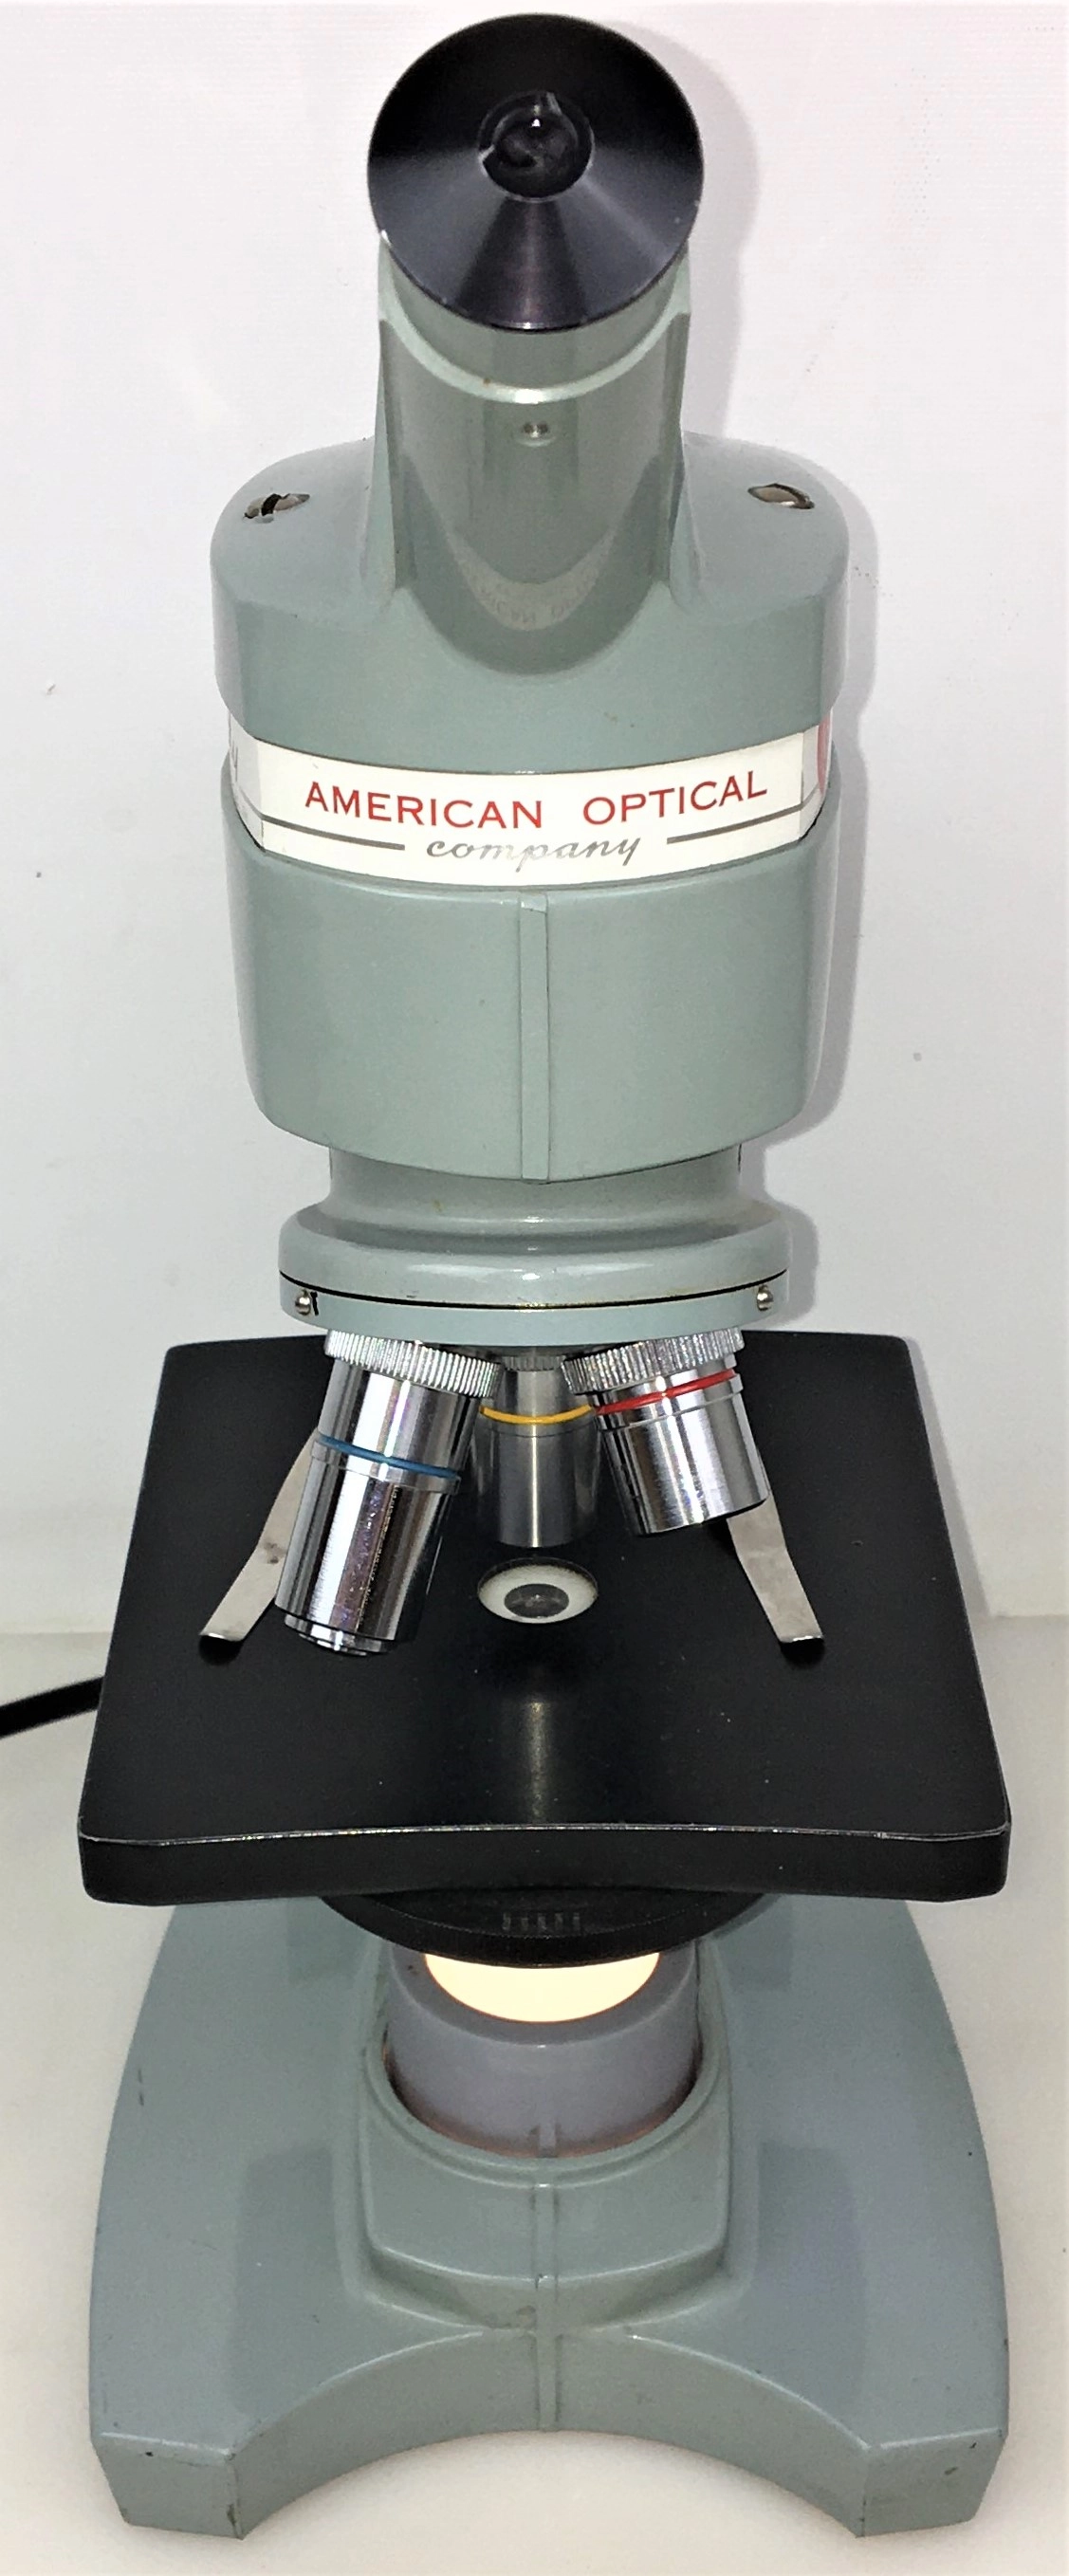 American Optical Spencer Sixty Monocular Microscope - 40X to 400X